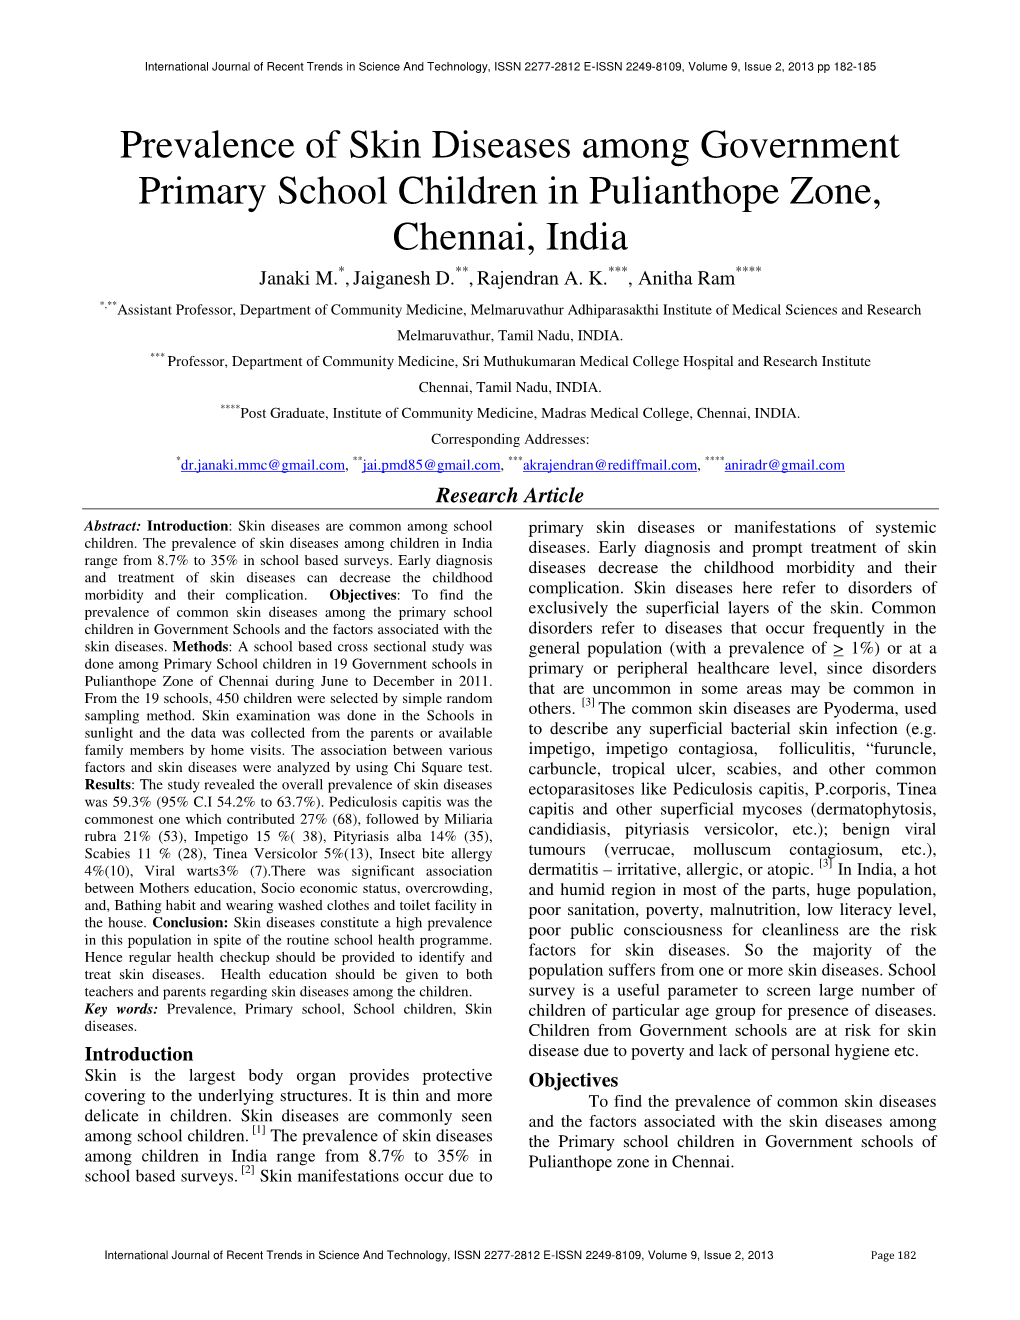 Prevalence of Skin Diseases Among Government Primary School Children in Pulianthope Zone, Chennai, India